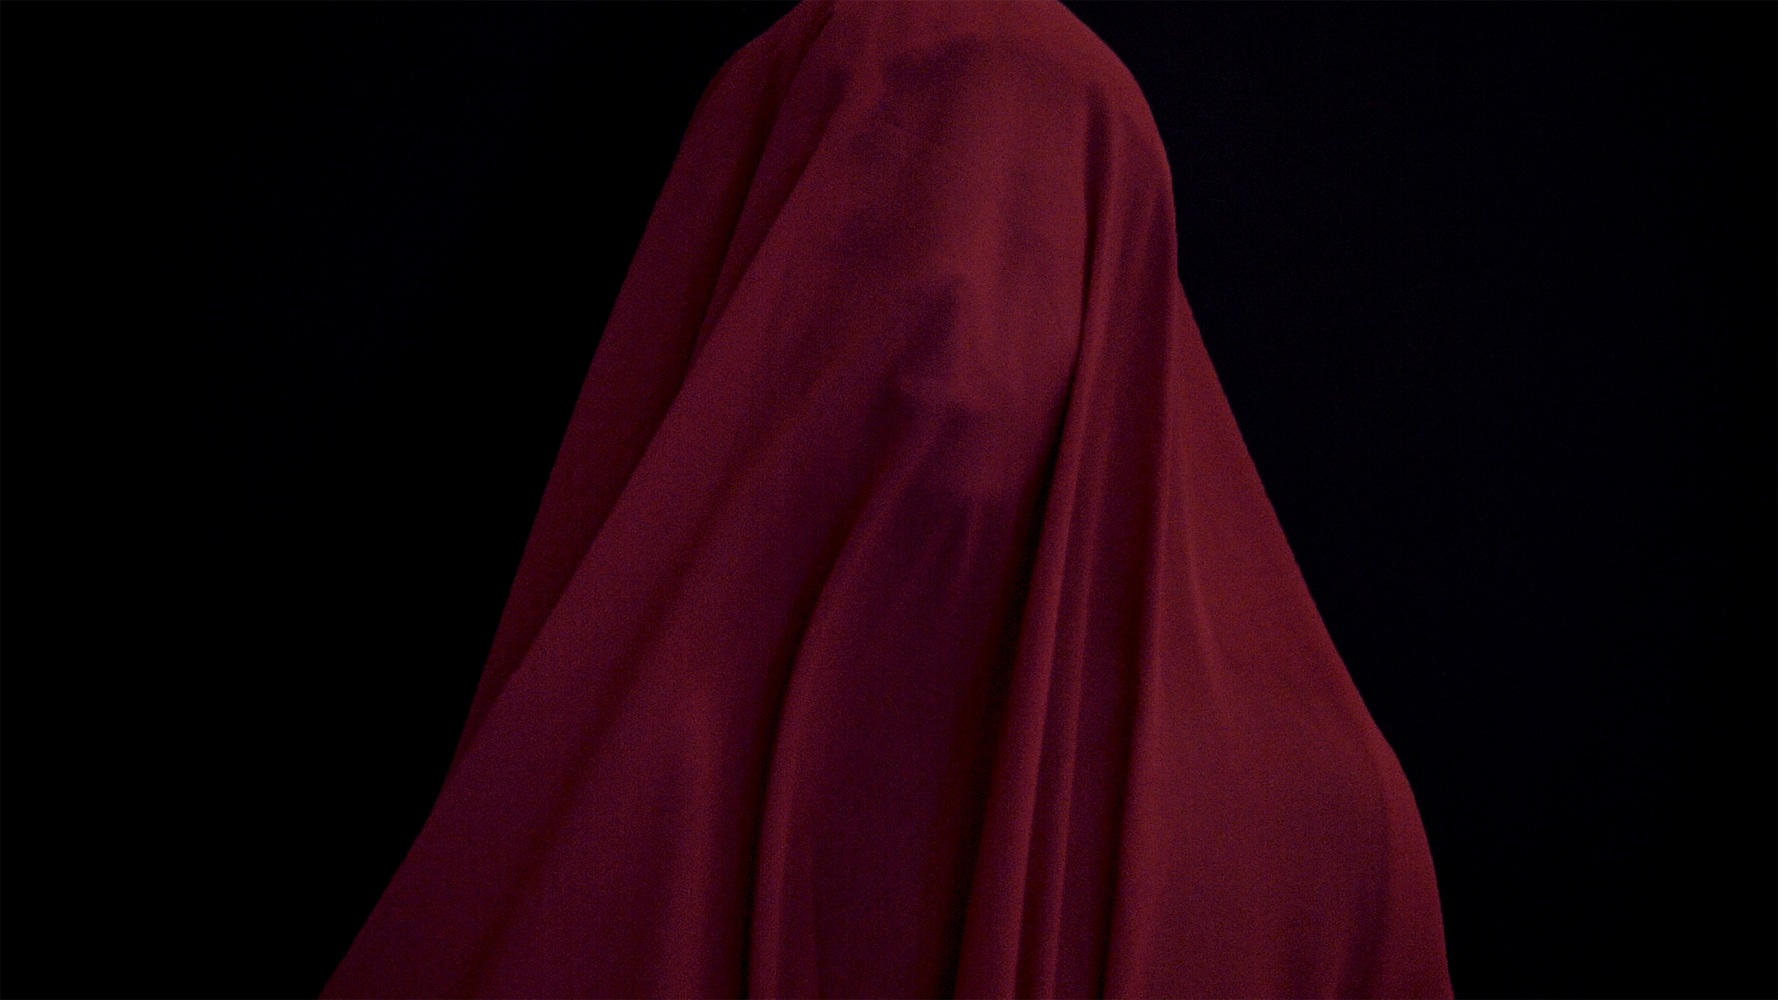 Digital print of a figure covered in a red sheet against a black background